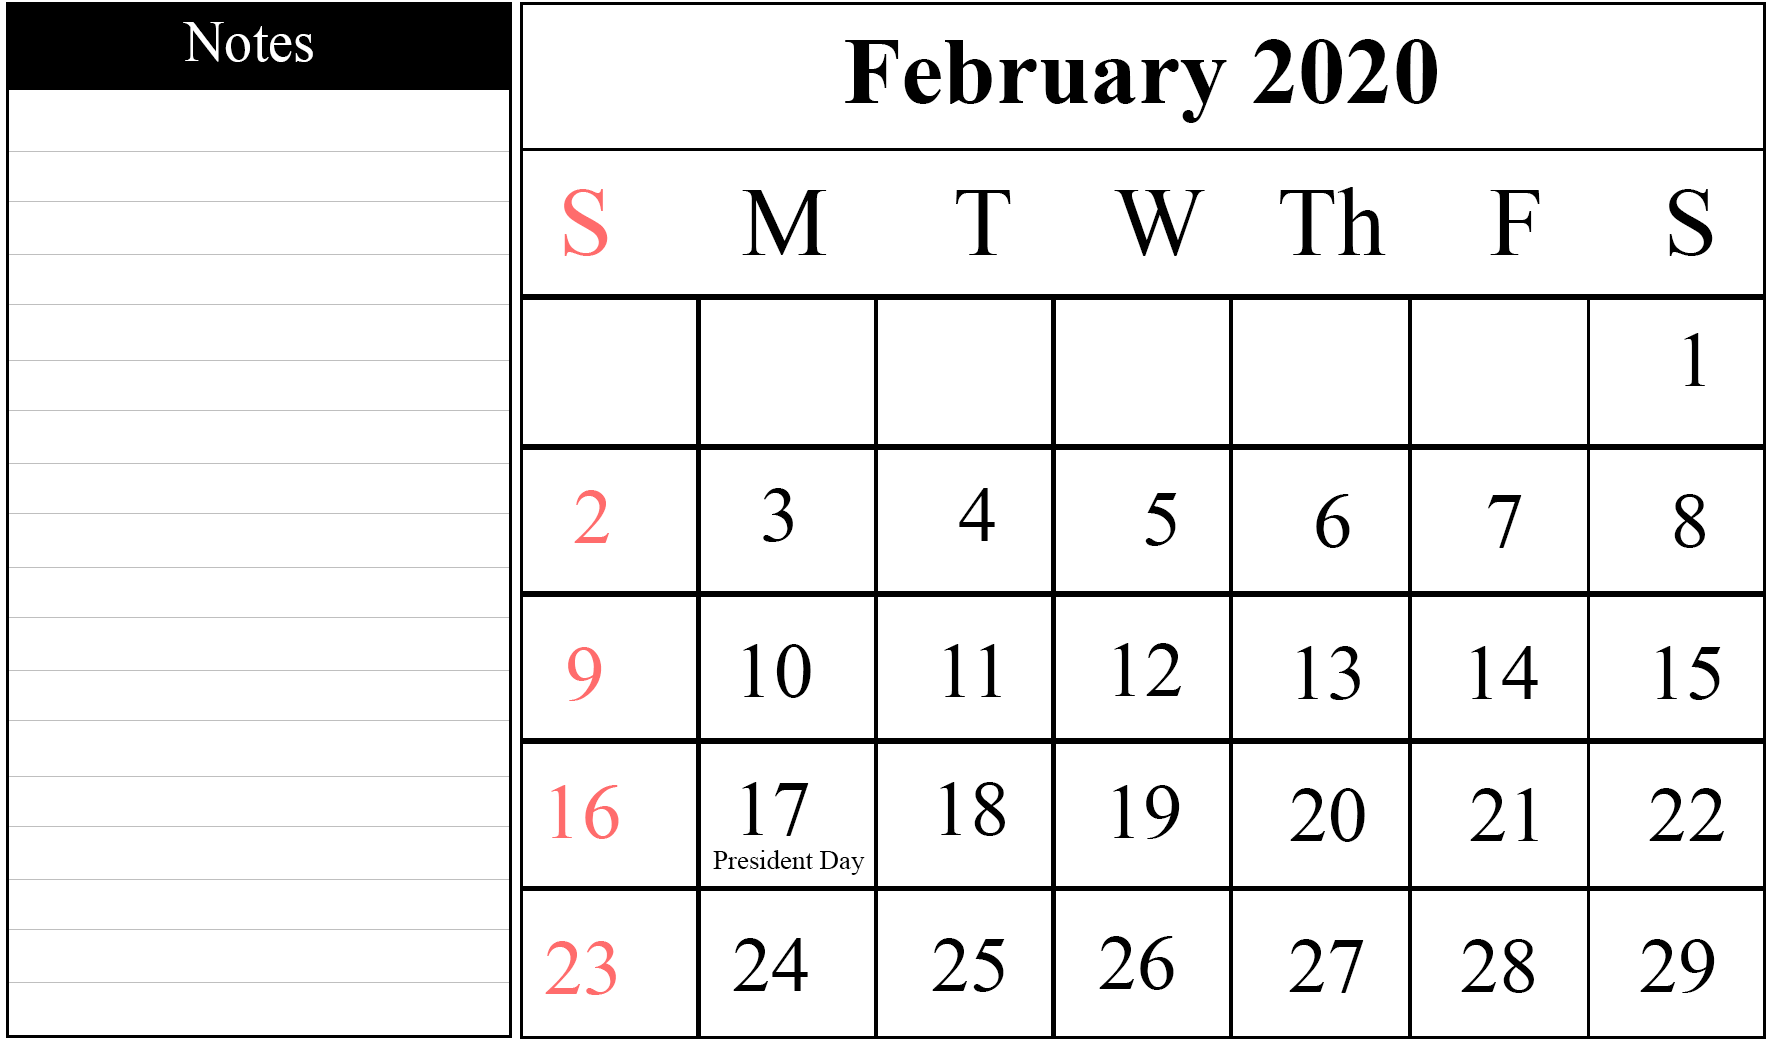 Calendar For February 2020 with Notes